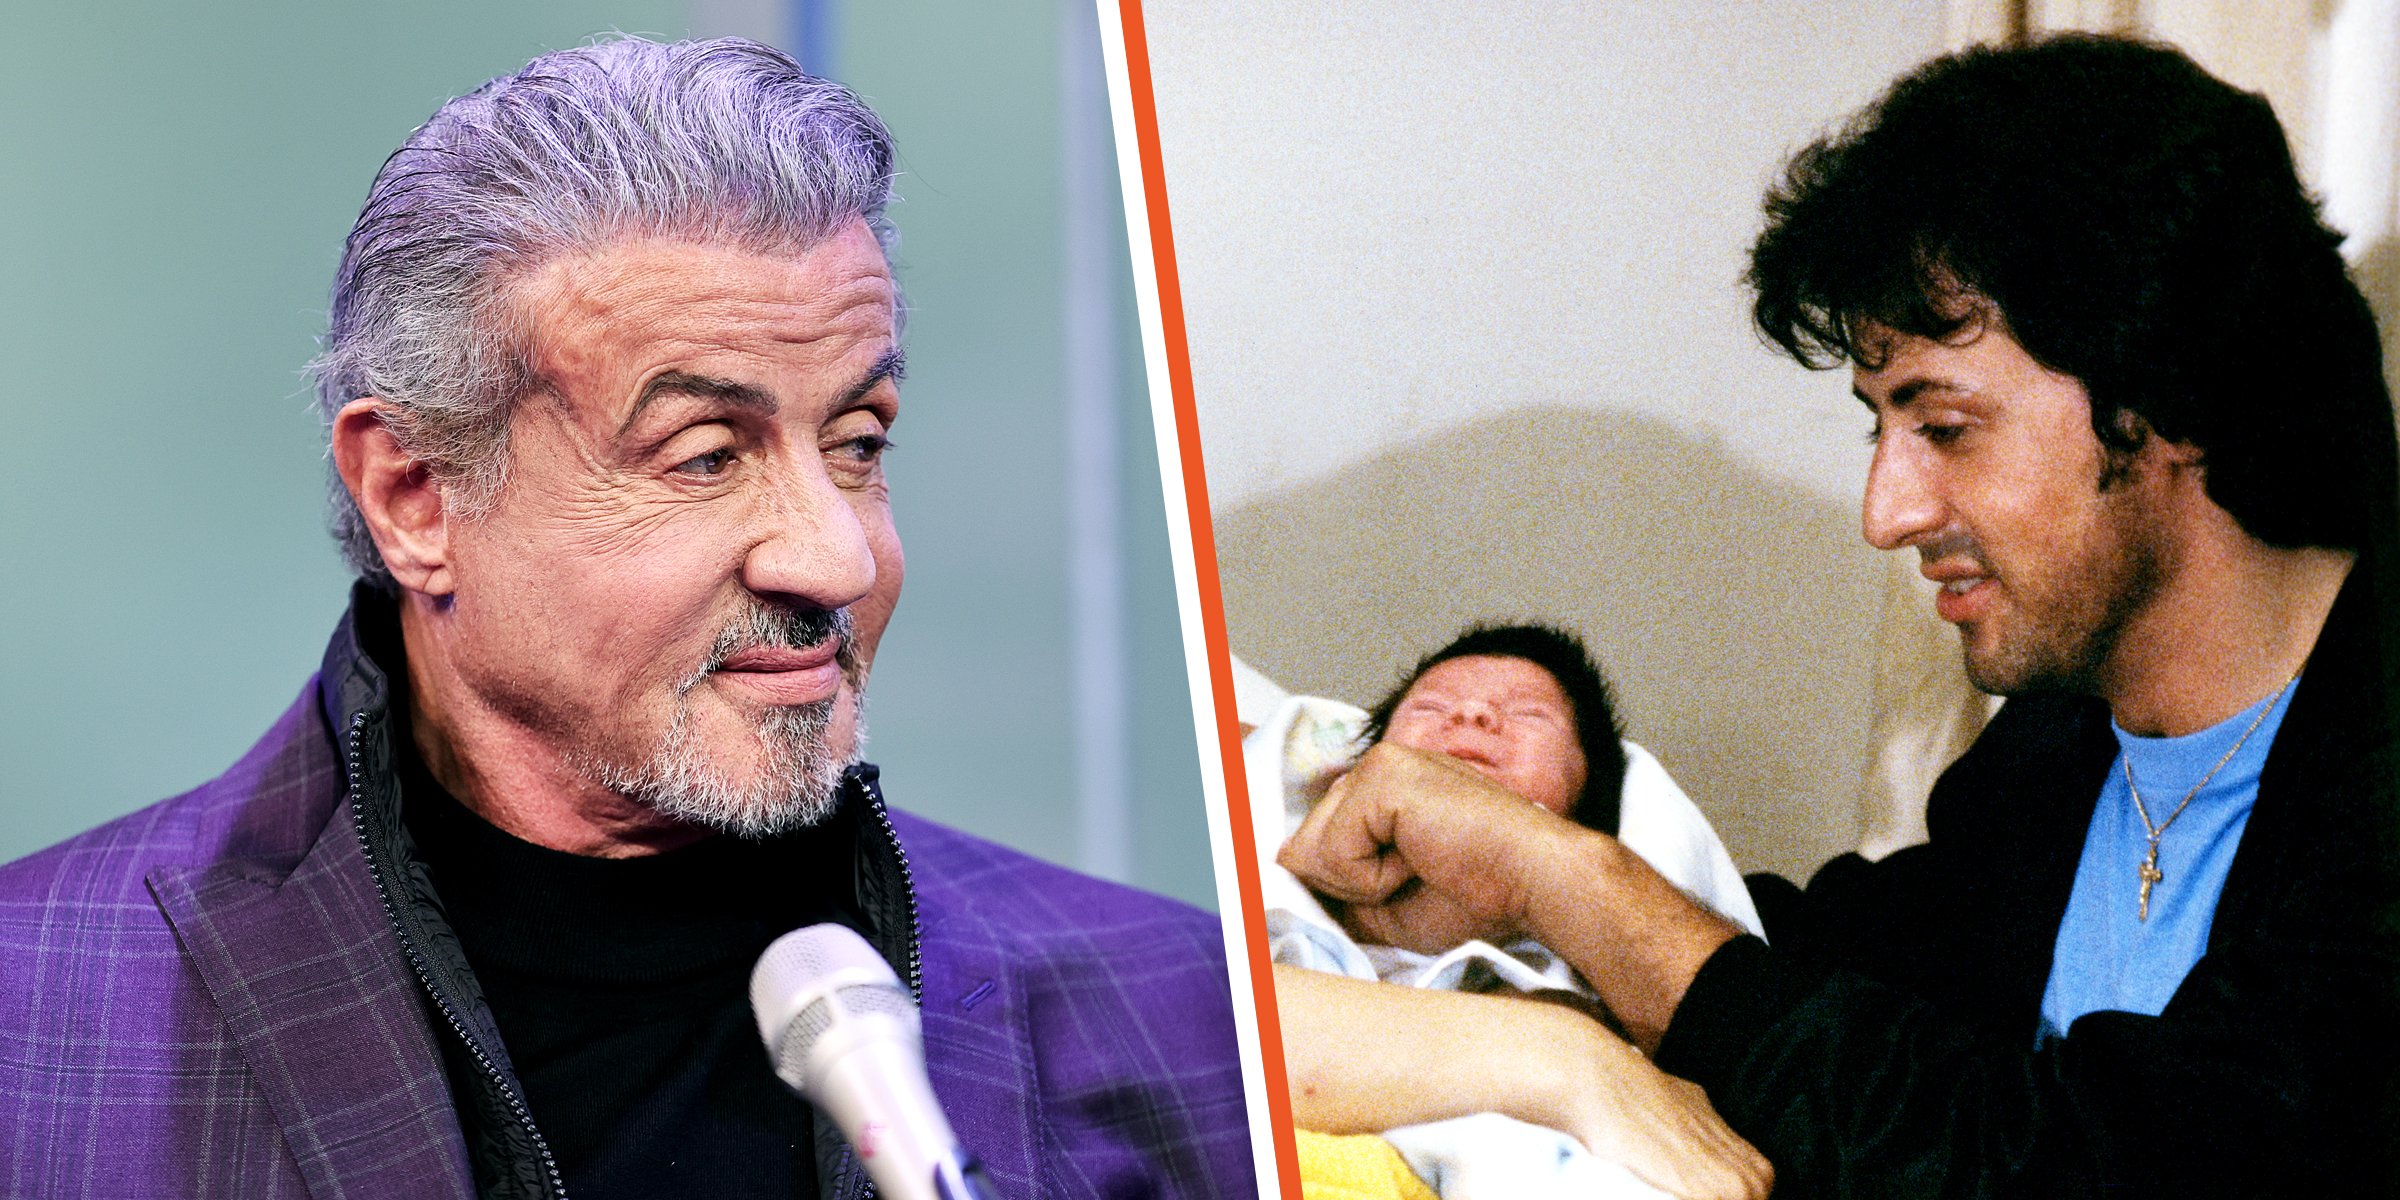 Sylvester Stallone ┃Seargeoh Stallone and Sylvester Stallone ┃Source: Getty Images